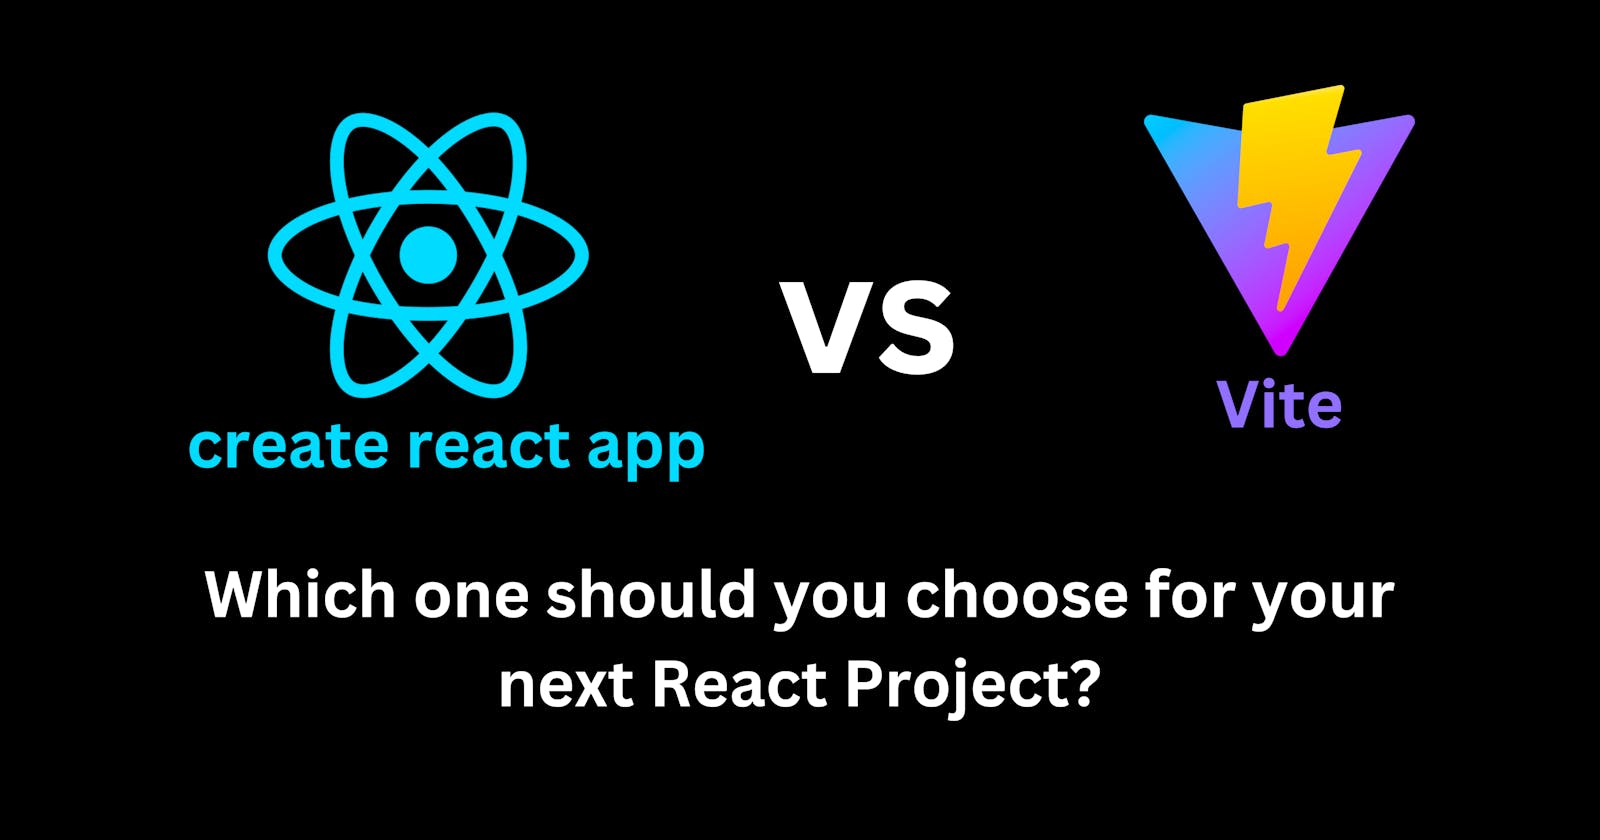 Create React App vs Vite: Which one should you choose for your next React Project?